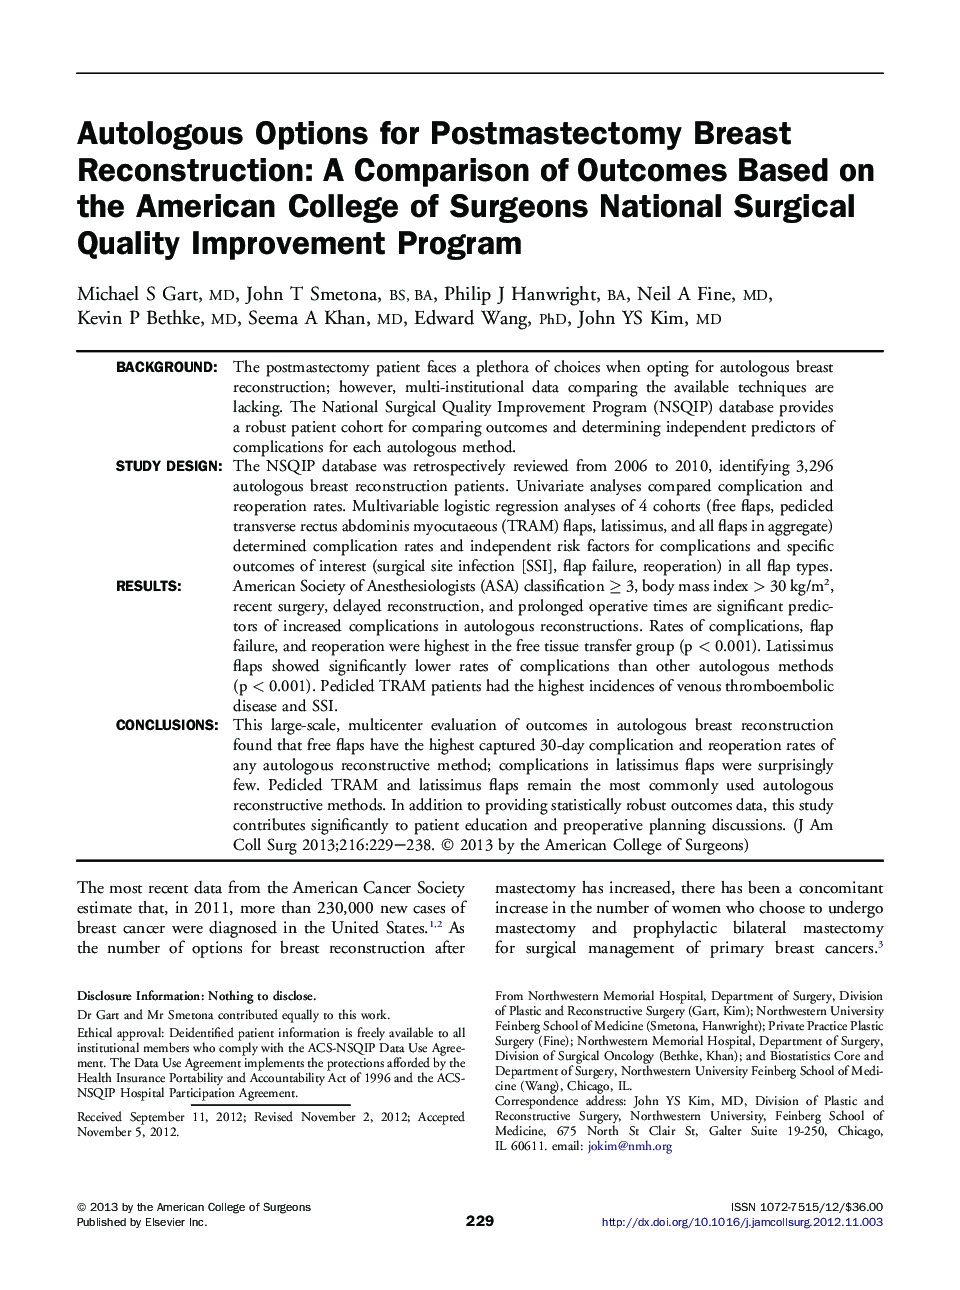 Autologous Options for Postmastectomy Breast Reconstruction: A Comparison of Outcomes Based on the American College of Surgeons National Surgical Quality Improvement Program 